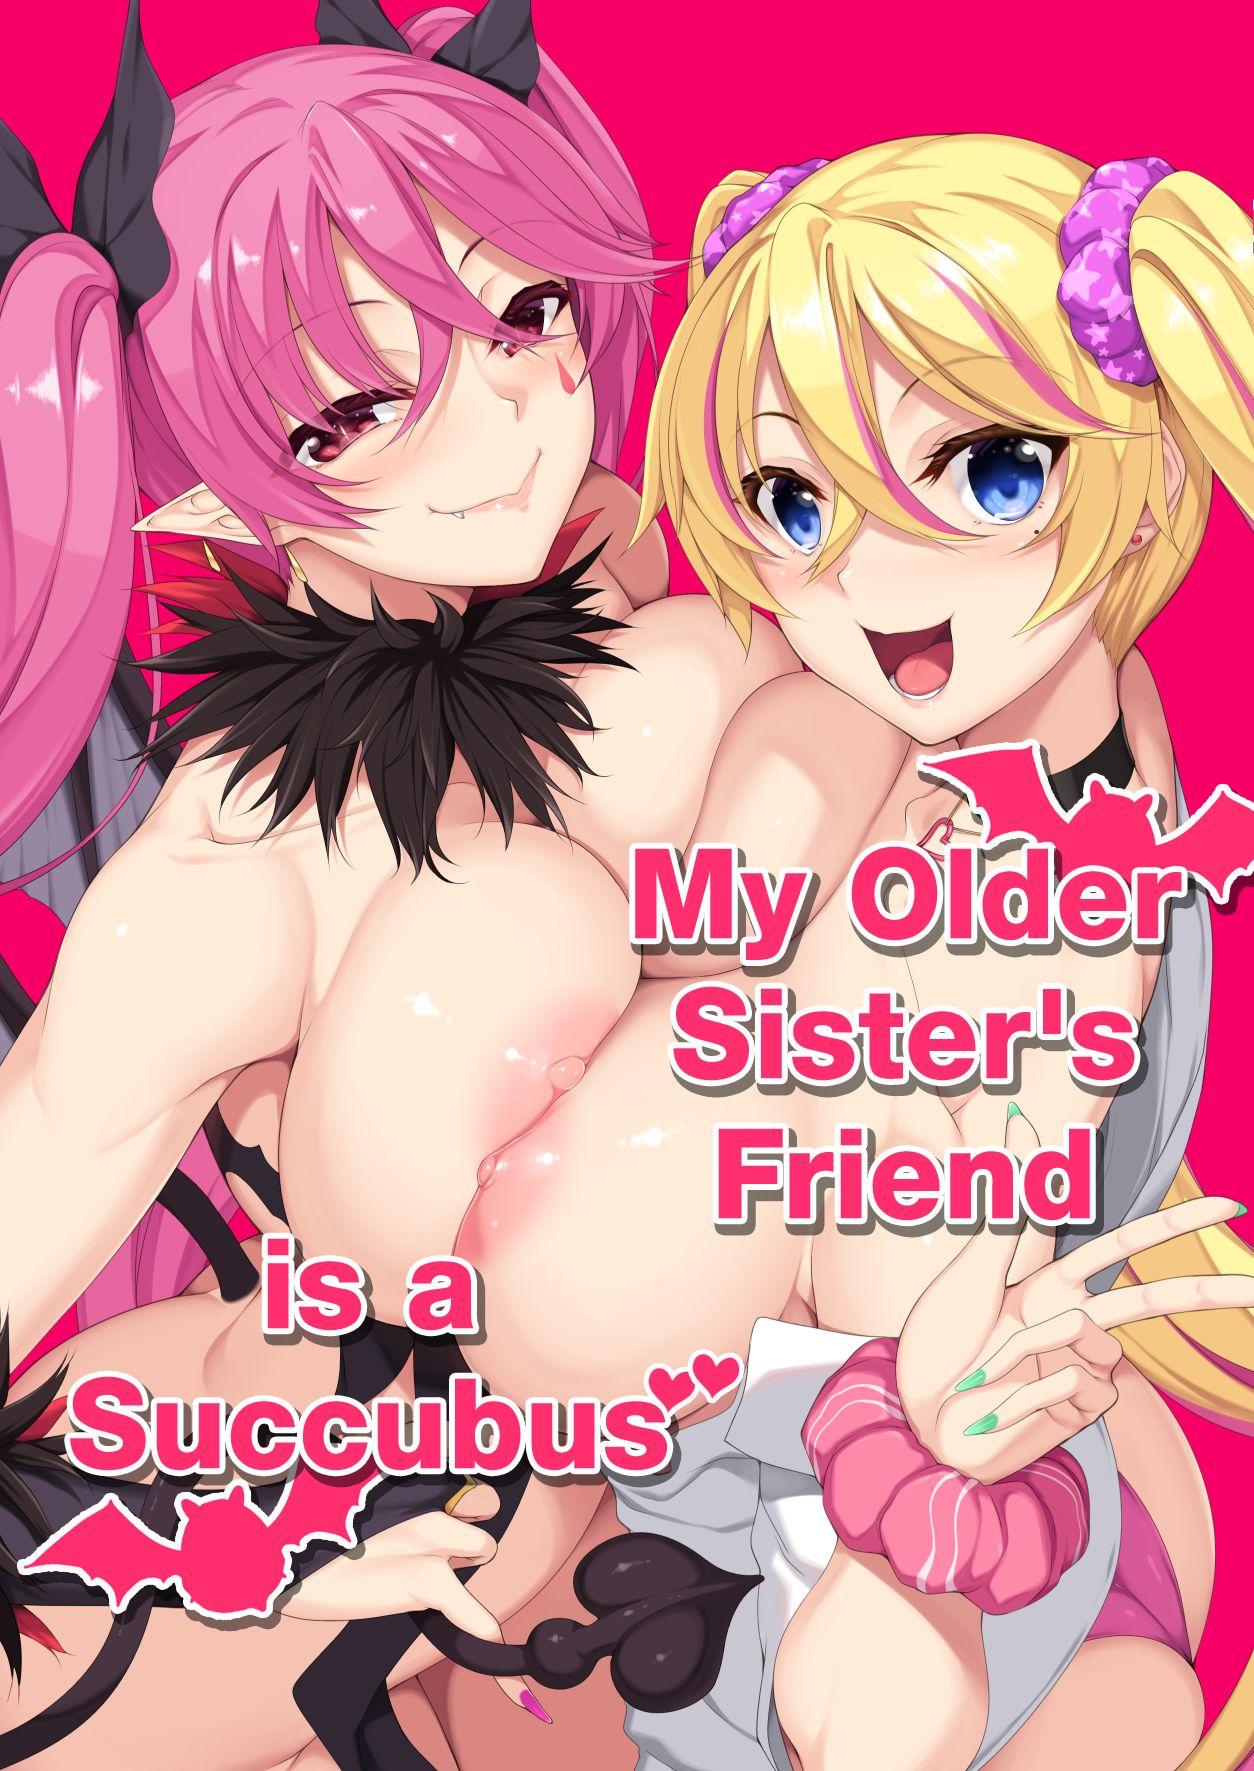 Leaked Onee-chan no Tomodachi ga Succubus de | My Older Sister's Friend is a Succubus - Original Foda - Page 1